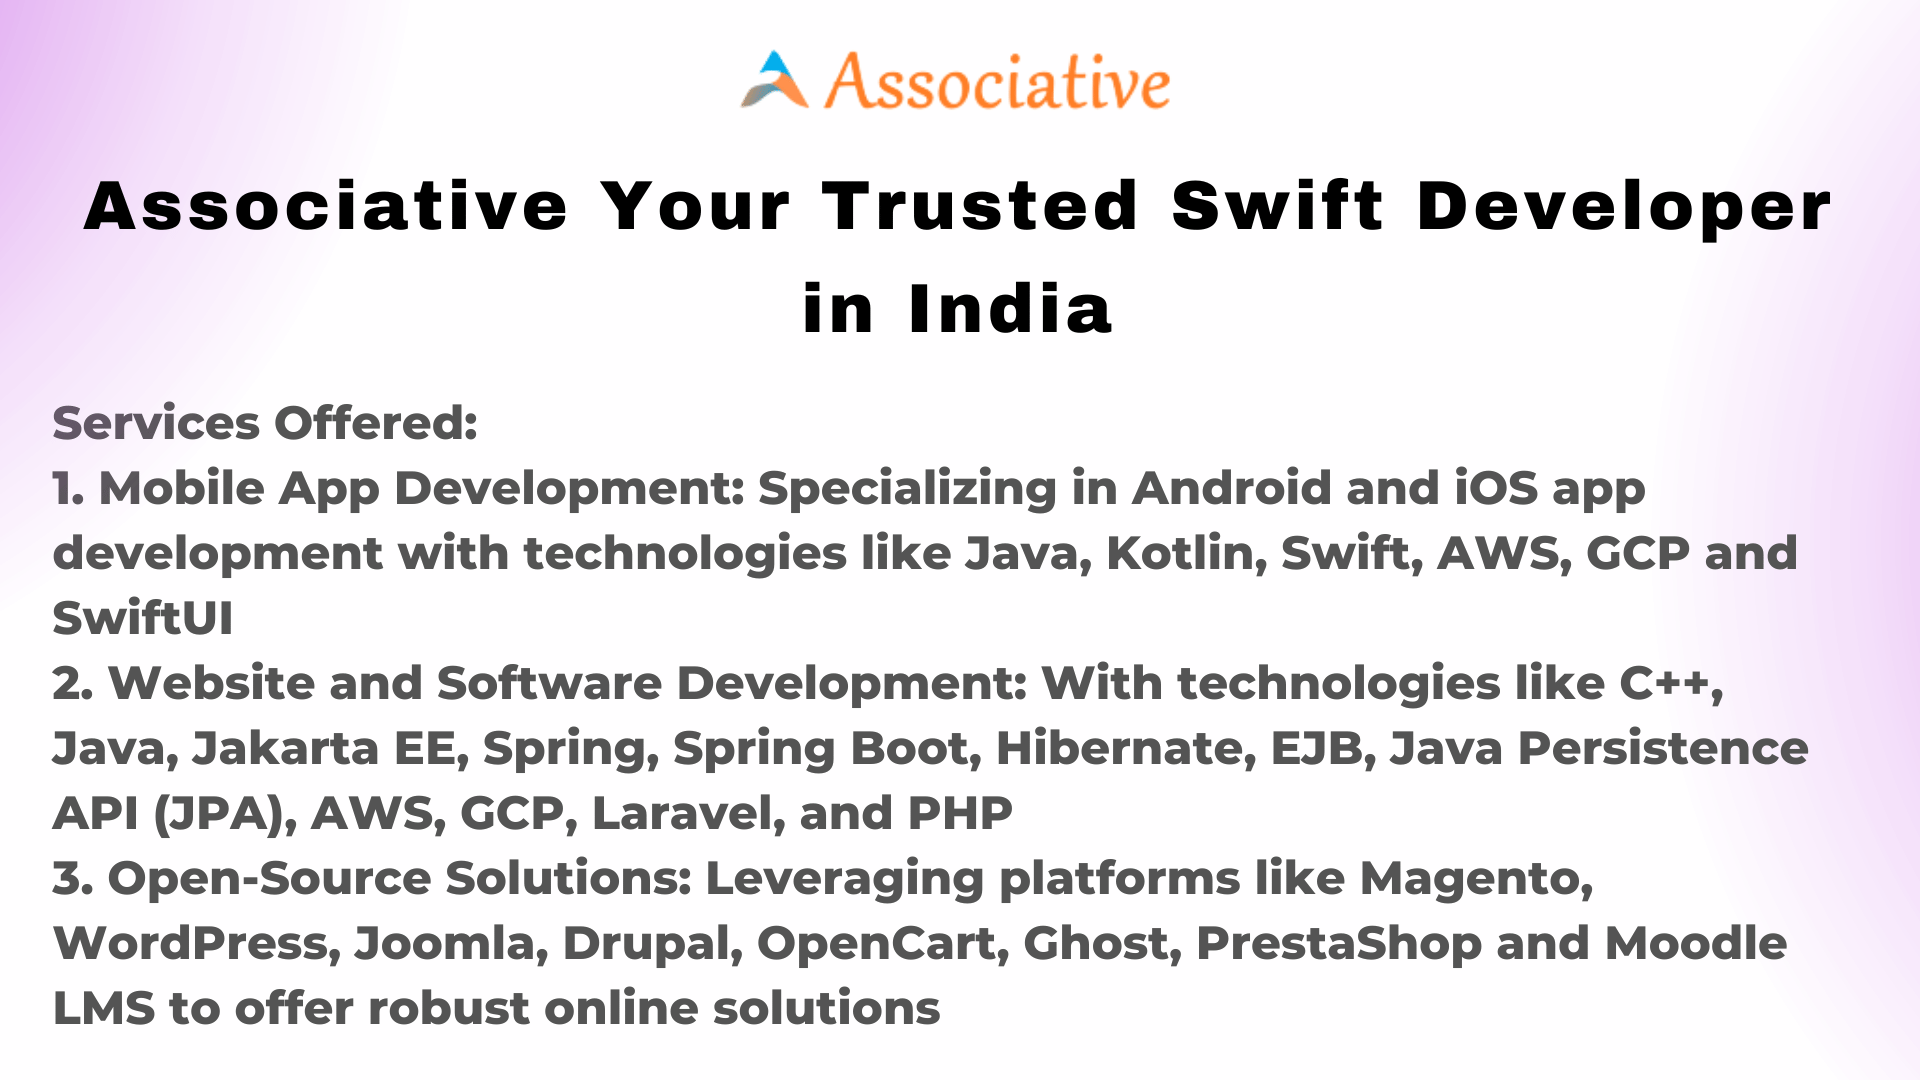 Associative Your Trusted Swift Developer in India